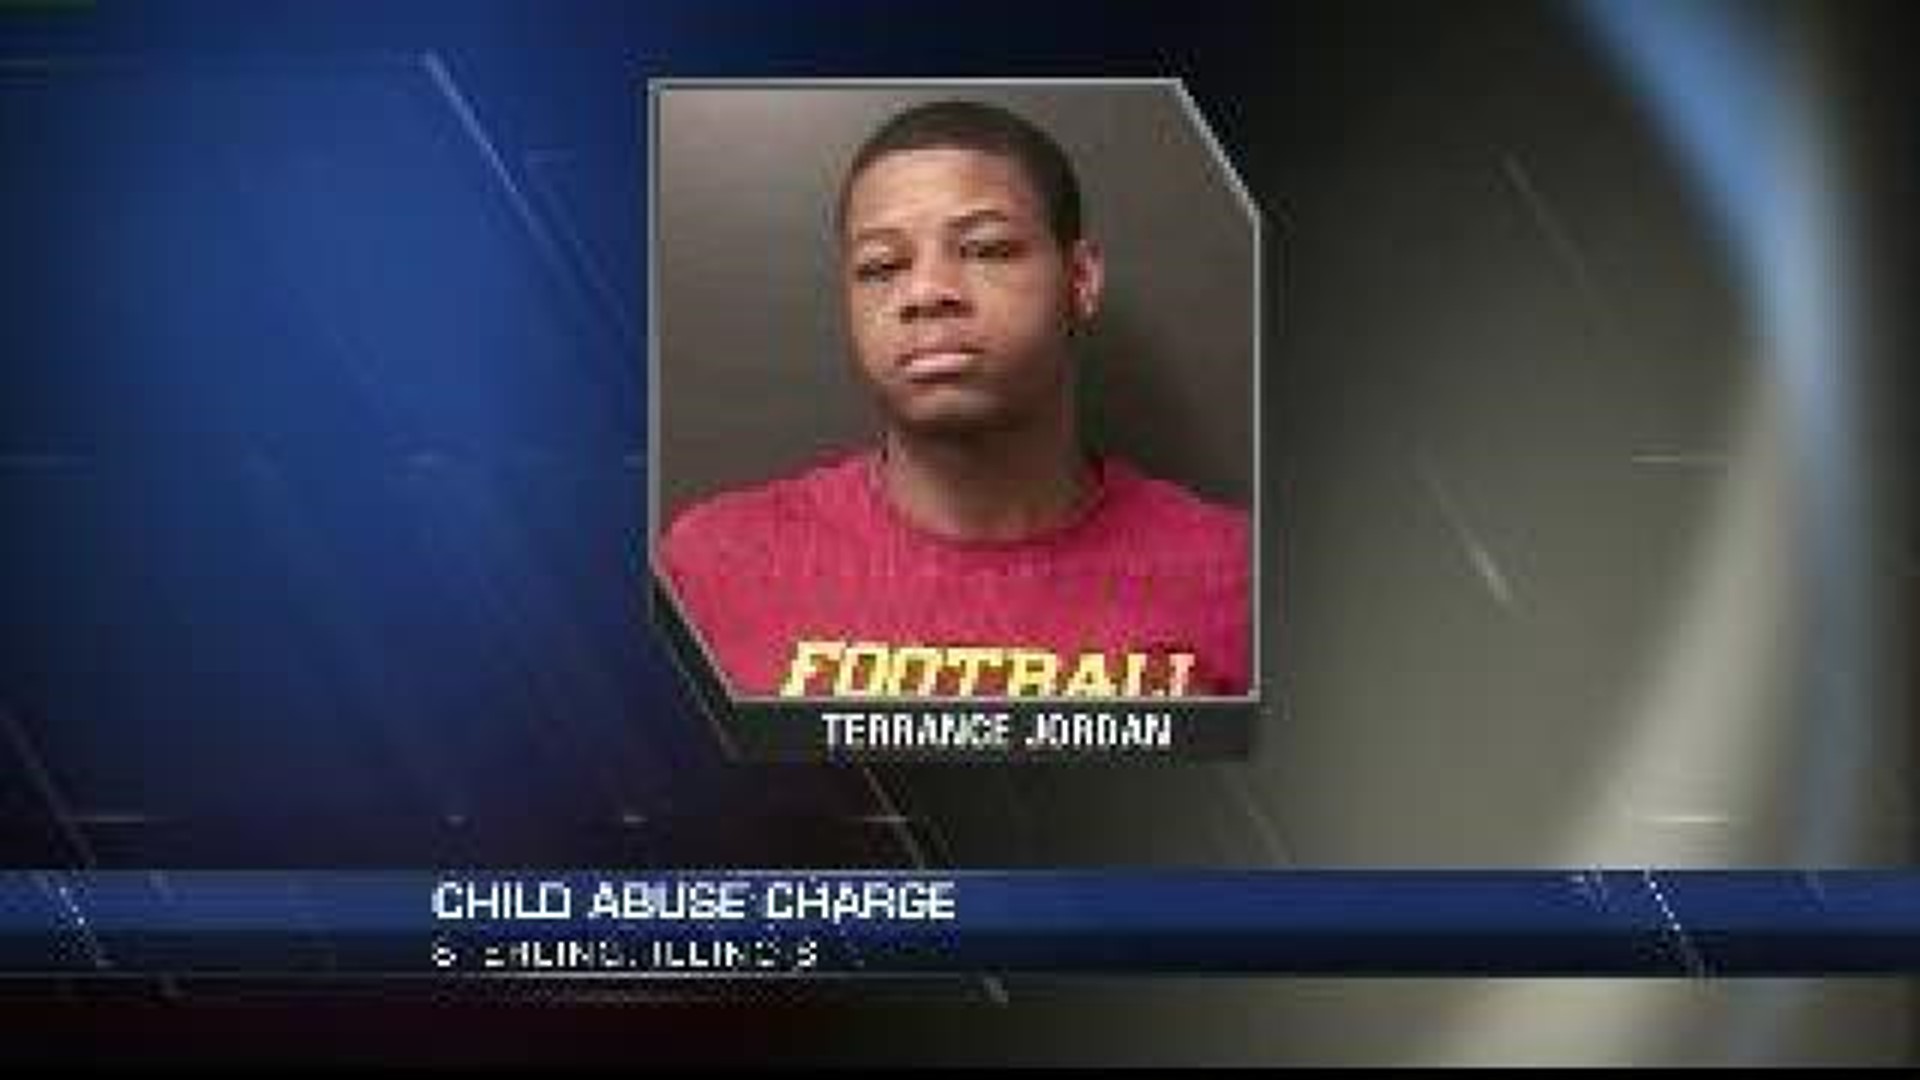 Man accused of abusing baby